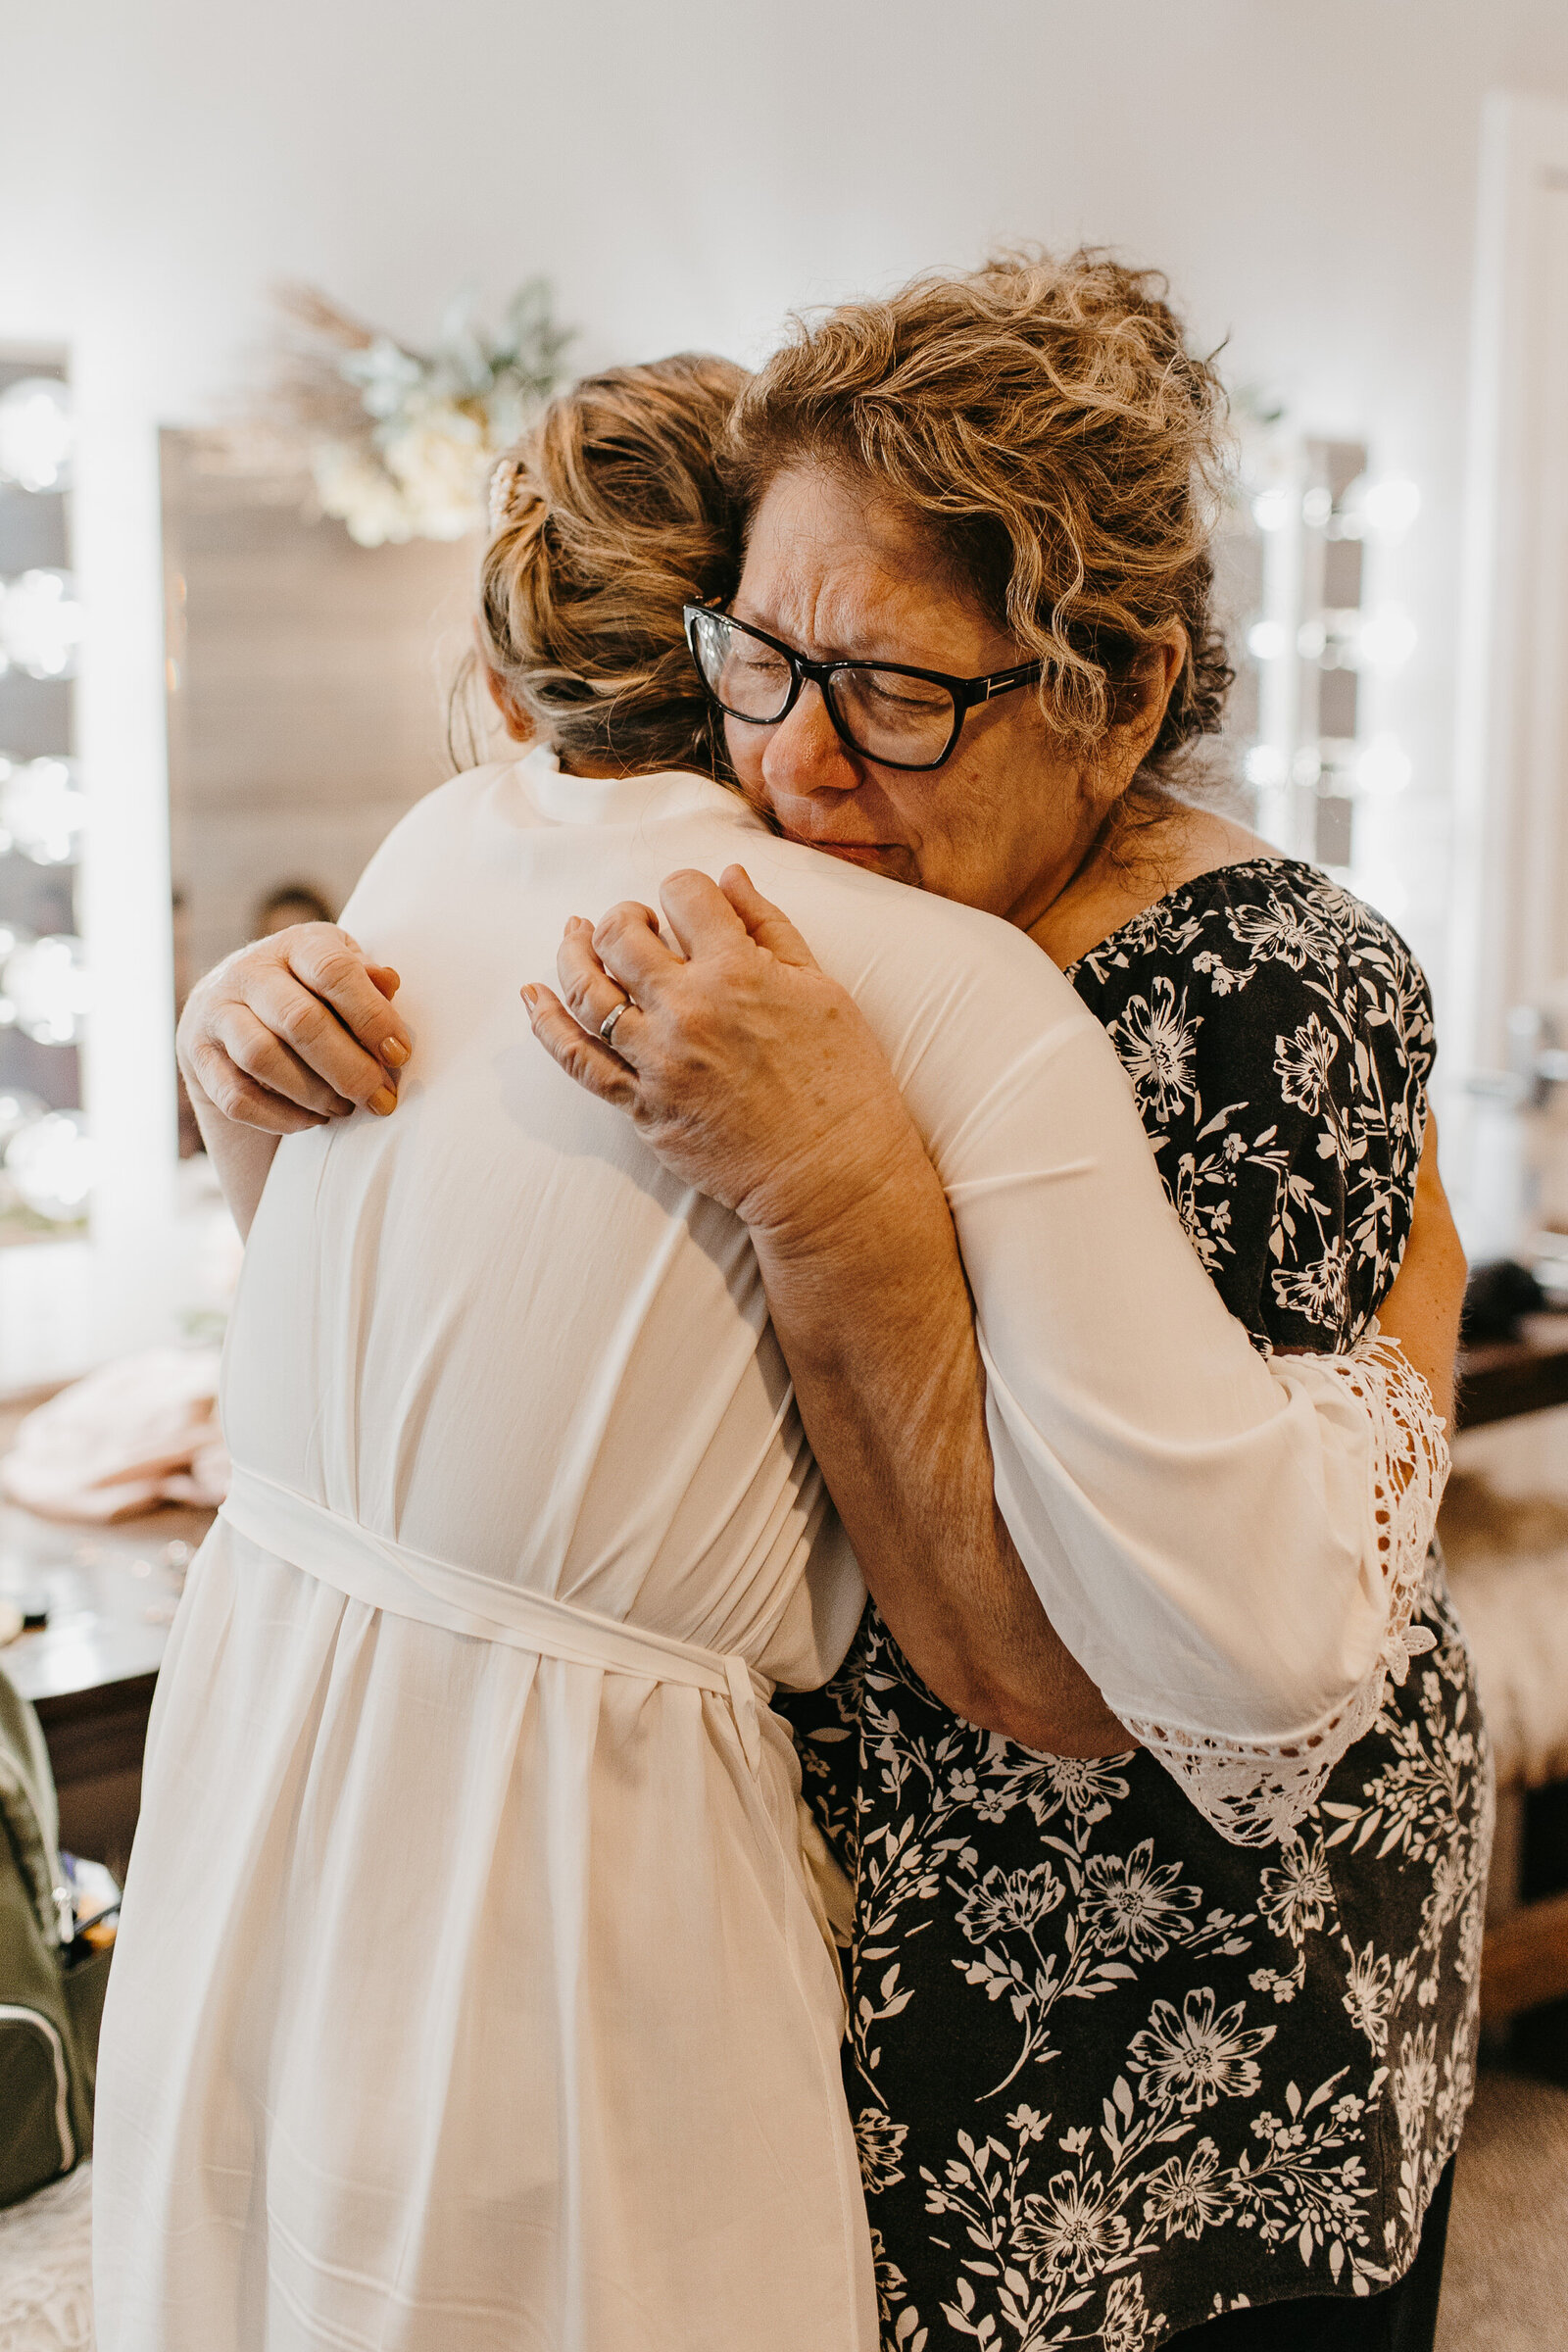 Mother and daughter embracing on wedding morning  - Alex Bo Photo